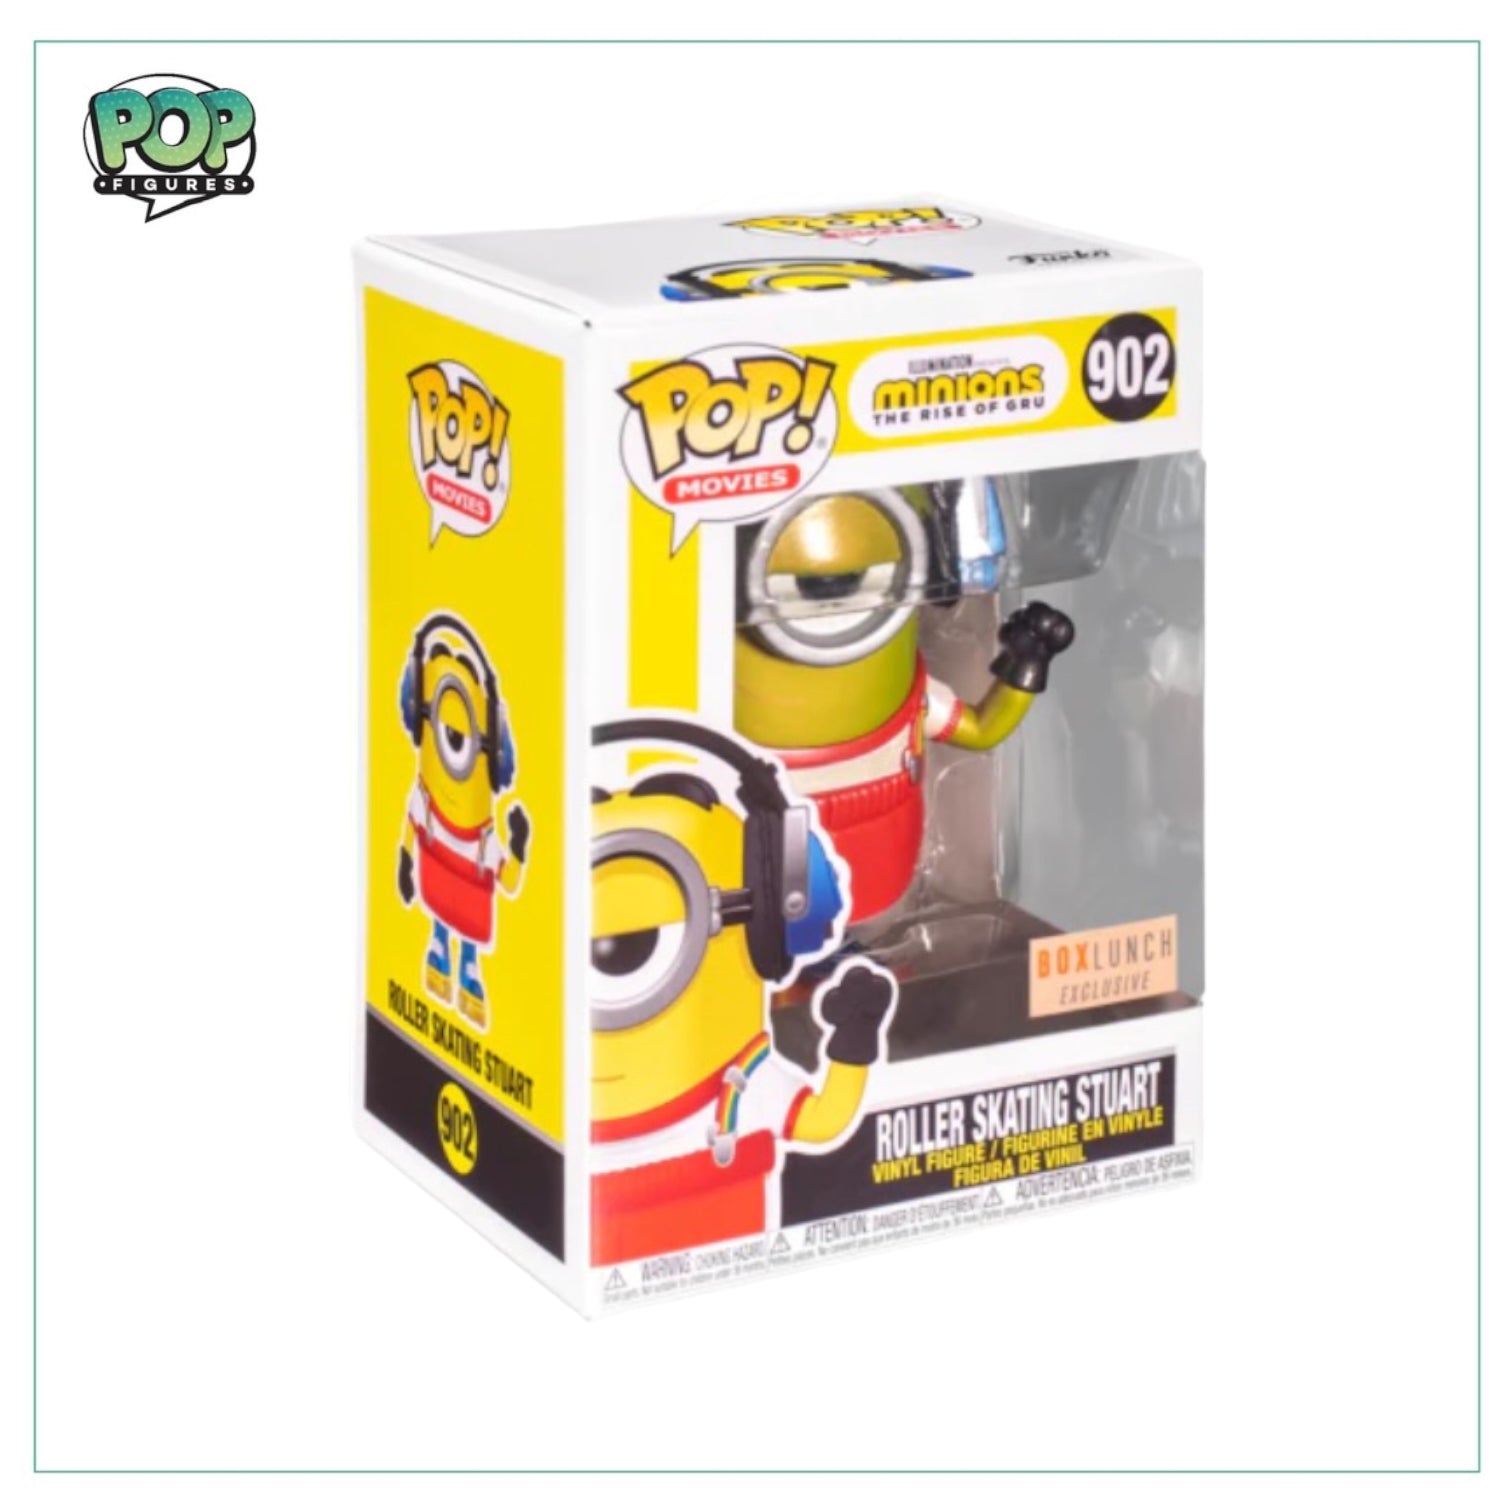 Roller Skating Stuart #902 Minions - The Rise Of Gru - Box Lunch Exclusive